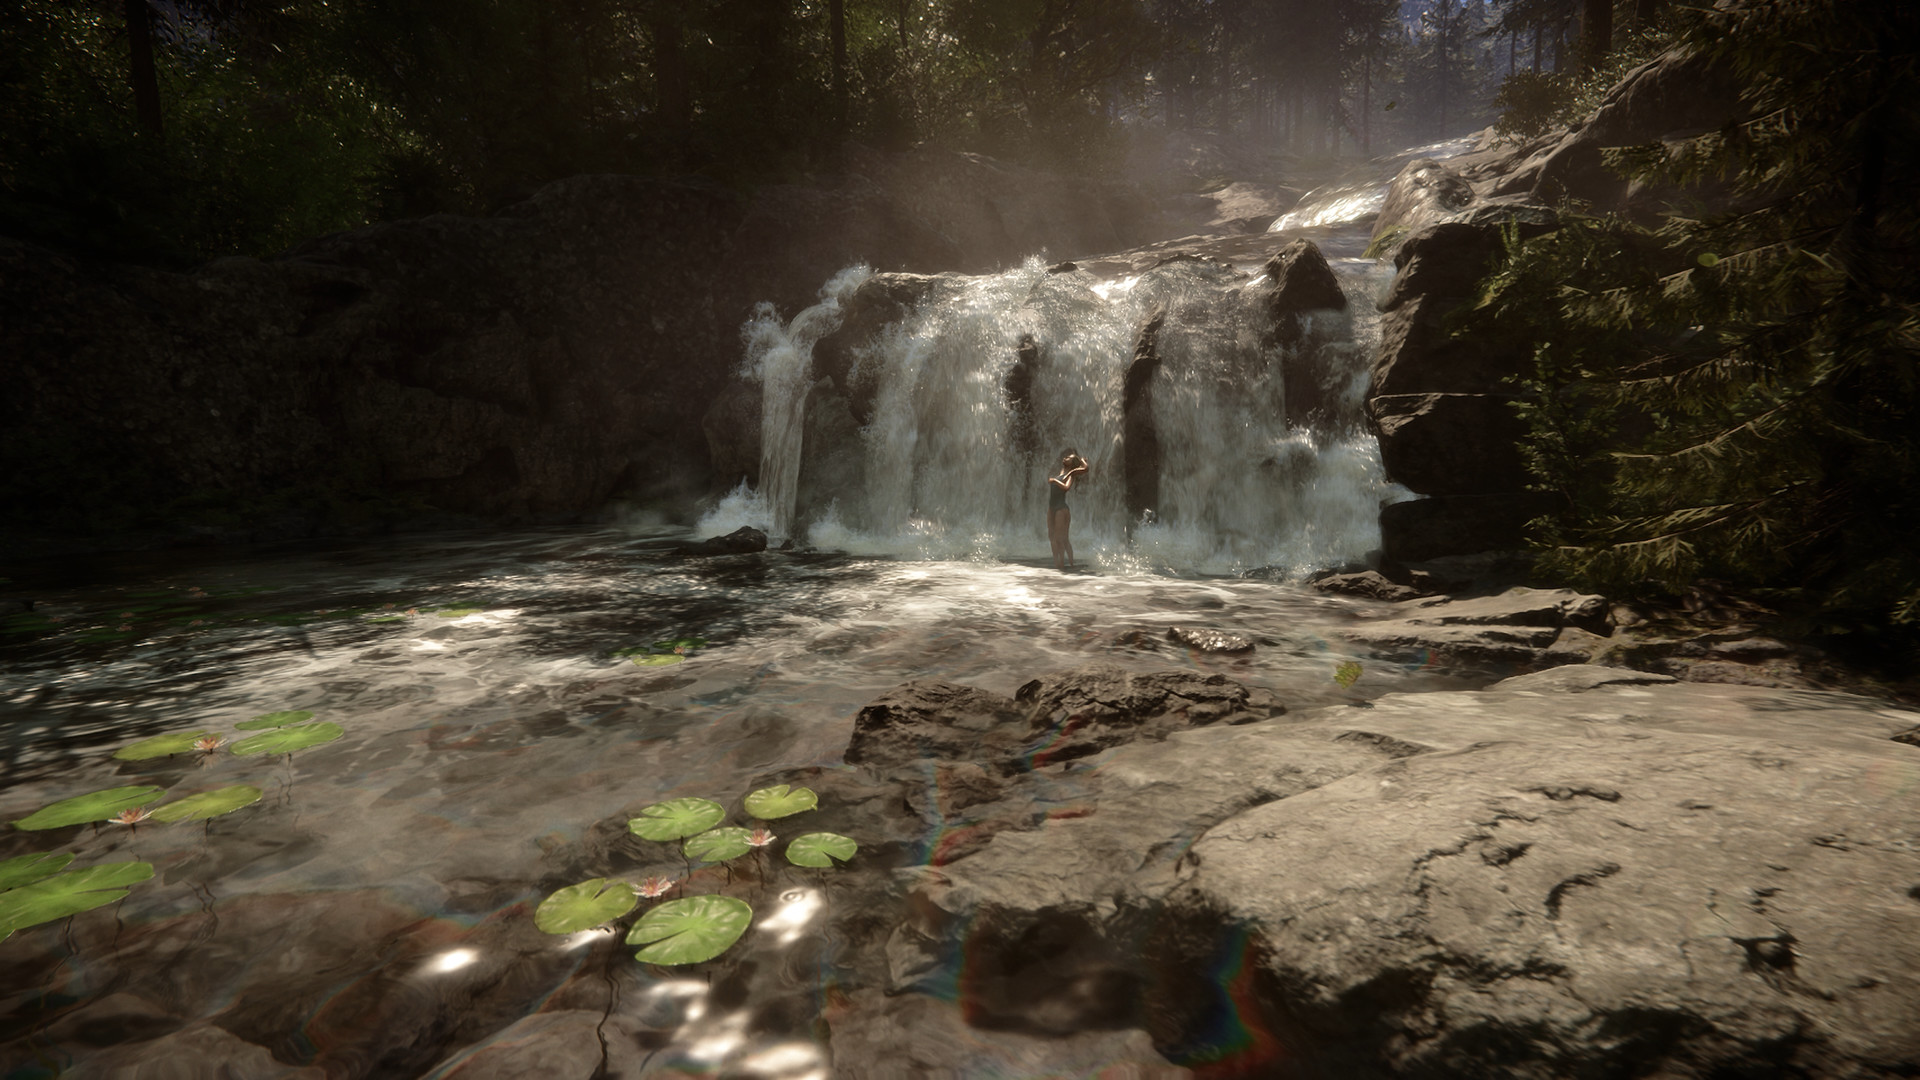 Sons of the Forest review in progress: tense, chilling survival